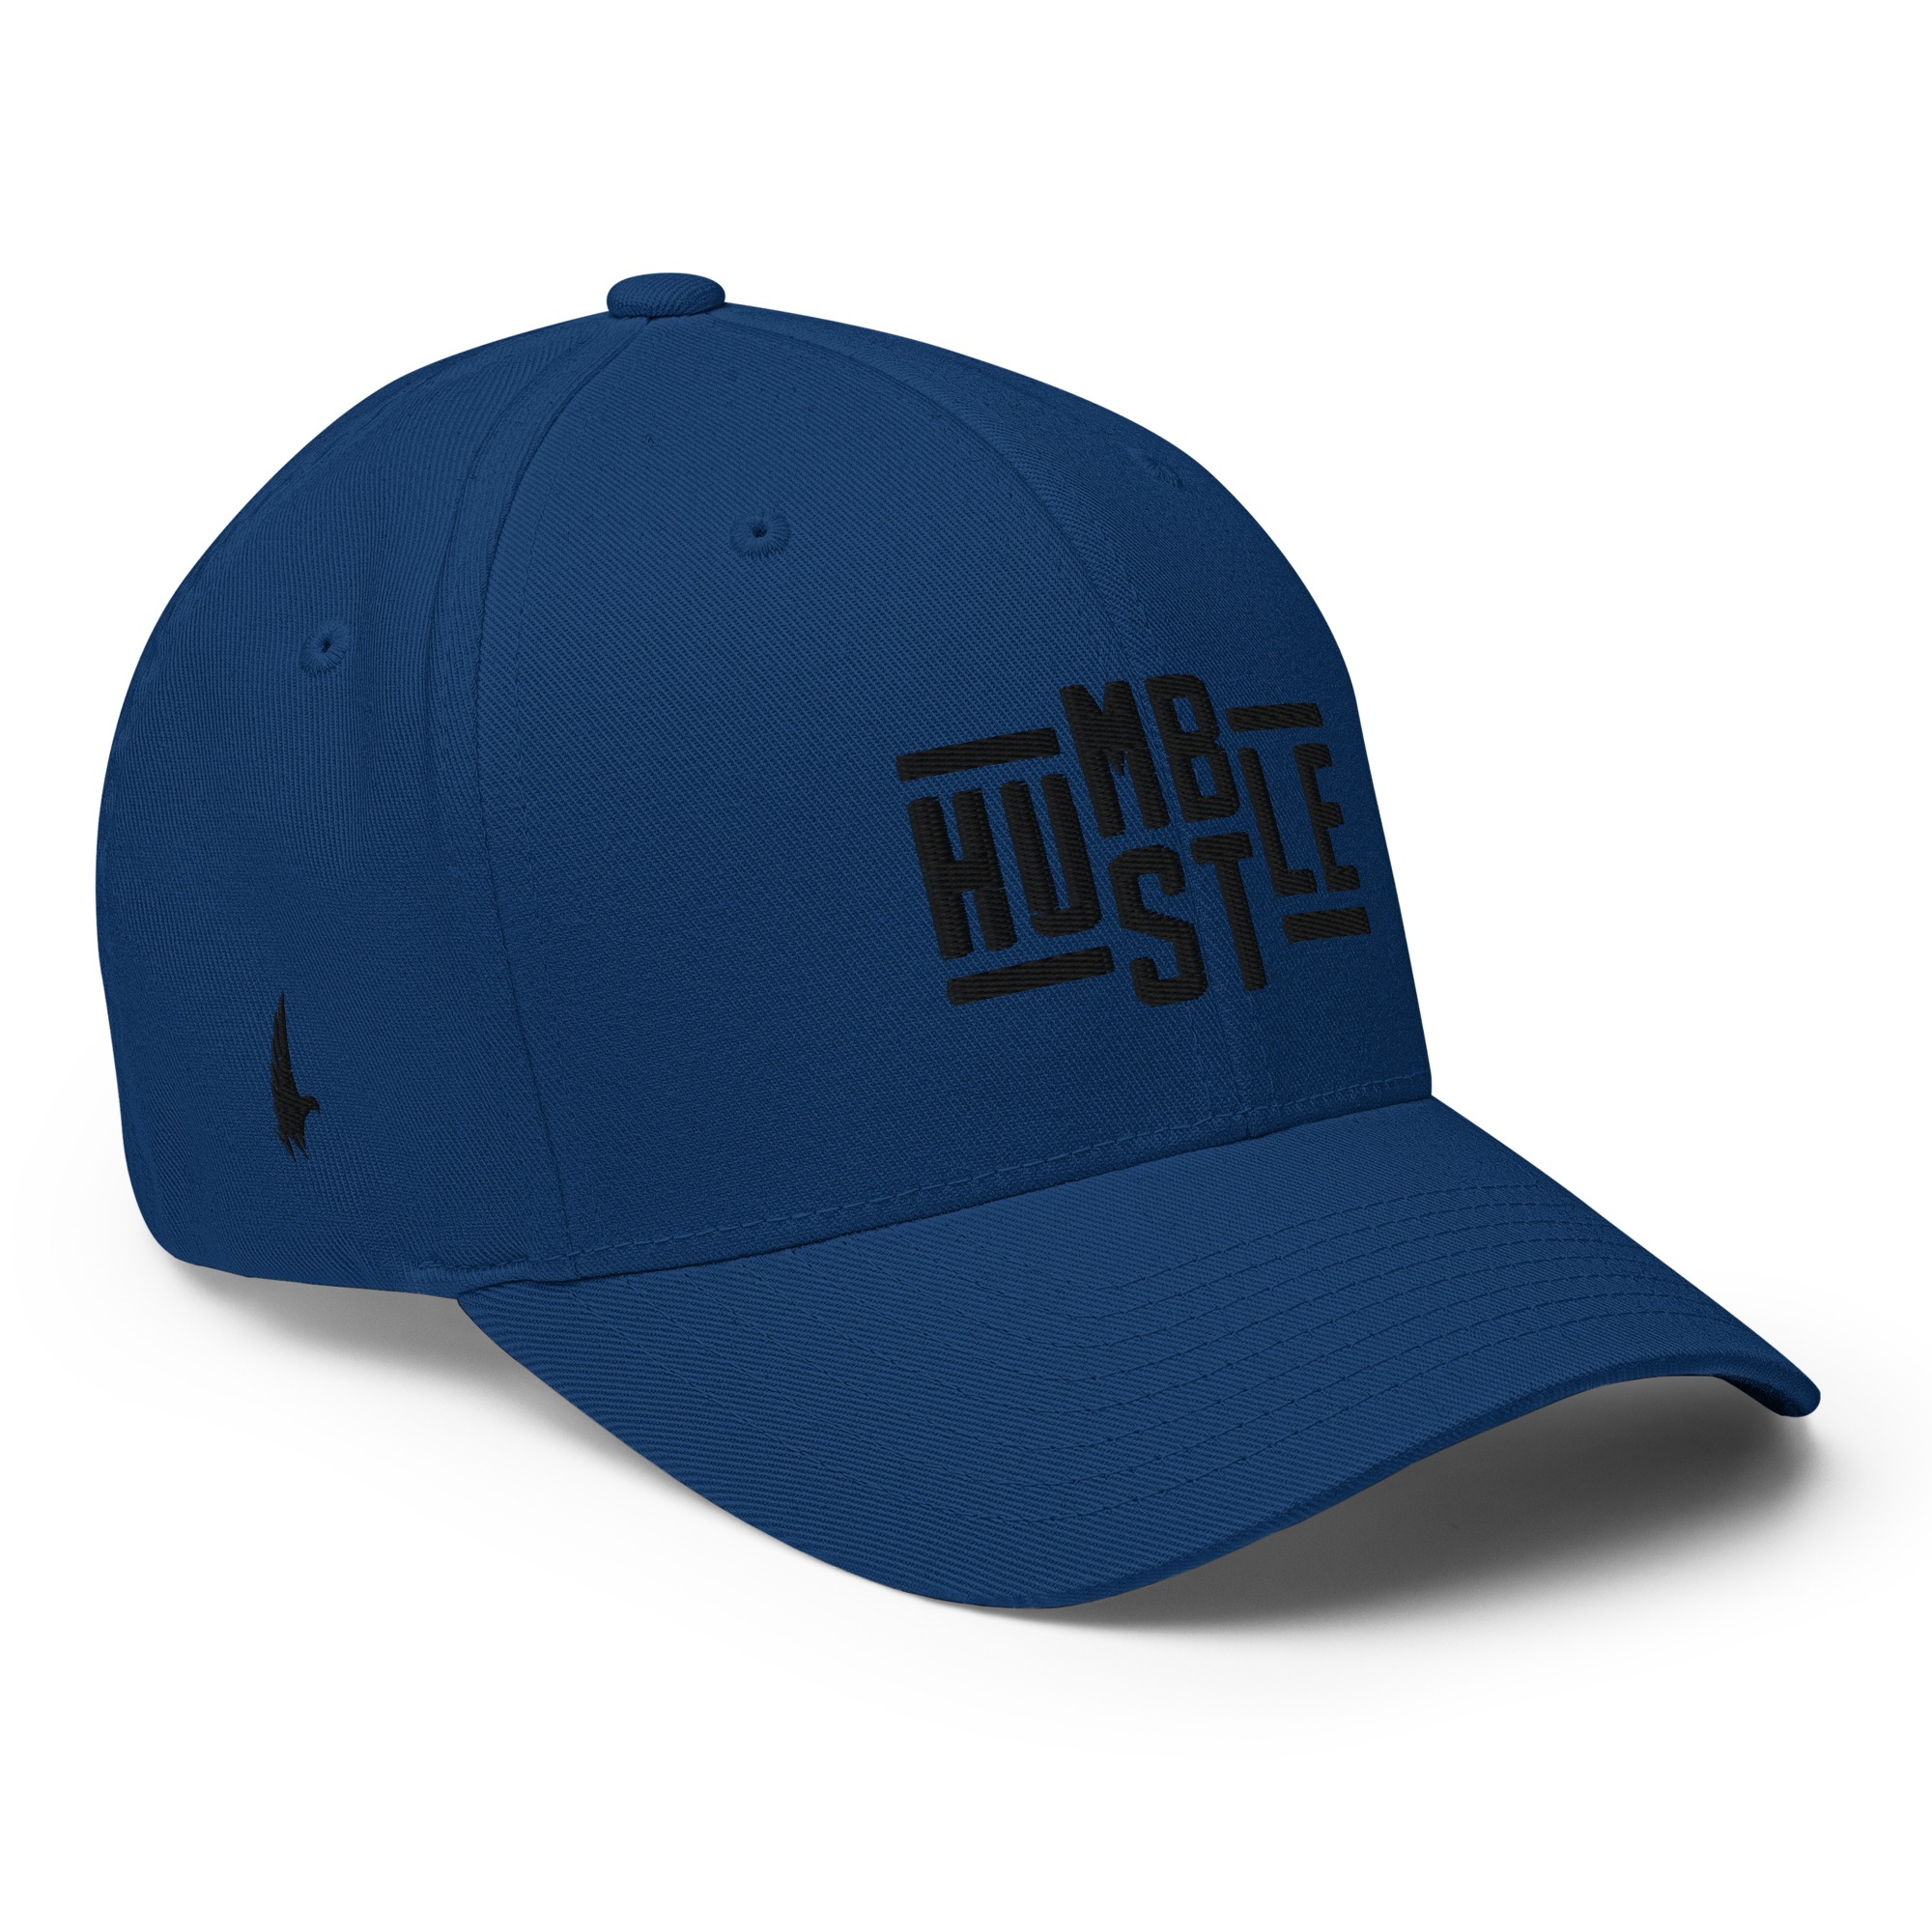 Loyalty Vibes Hustle Fitted Hat Blue / Black Fitted - Loyalty Vibes